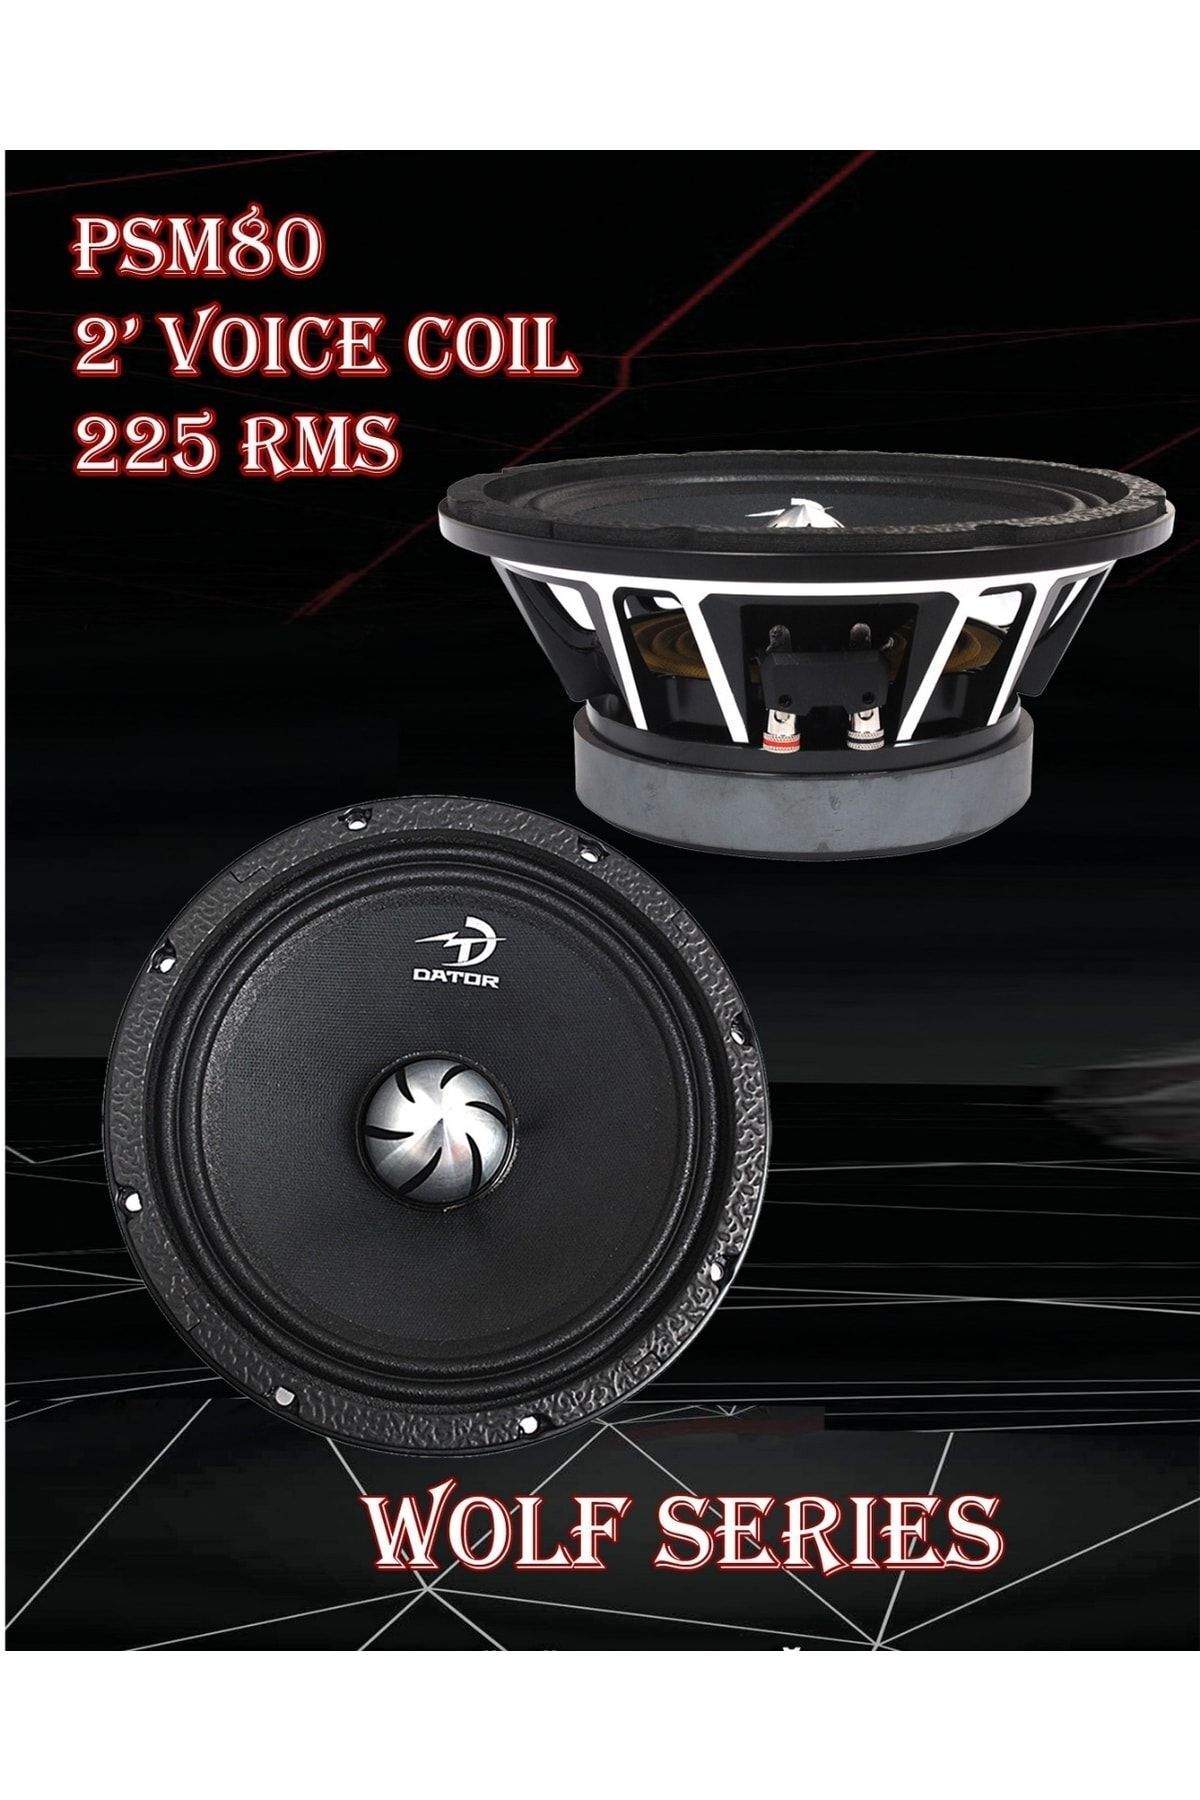 Dator Psm80 Wolf Series 20 Cm 225 Rms 1000w